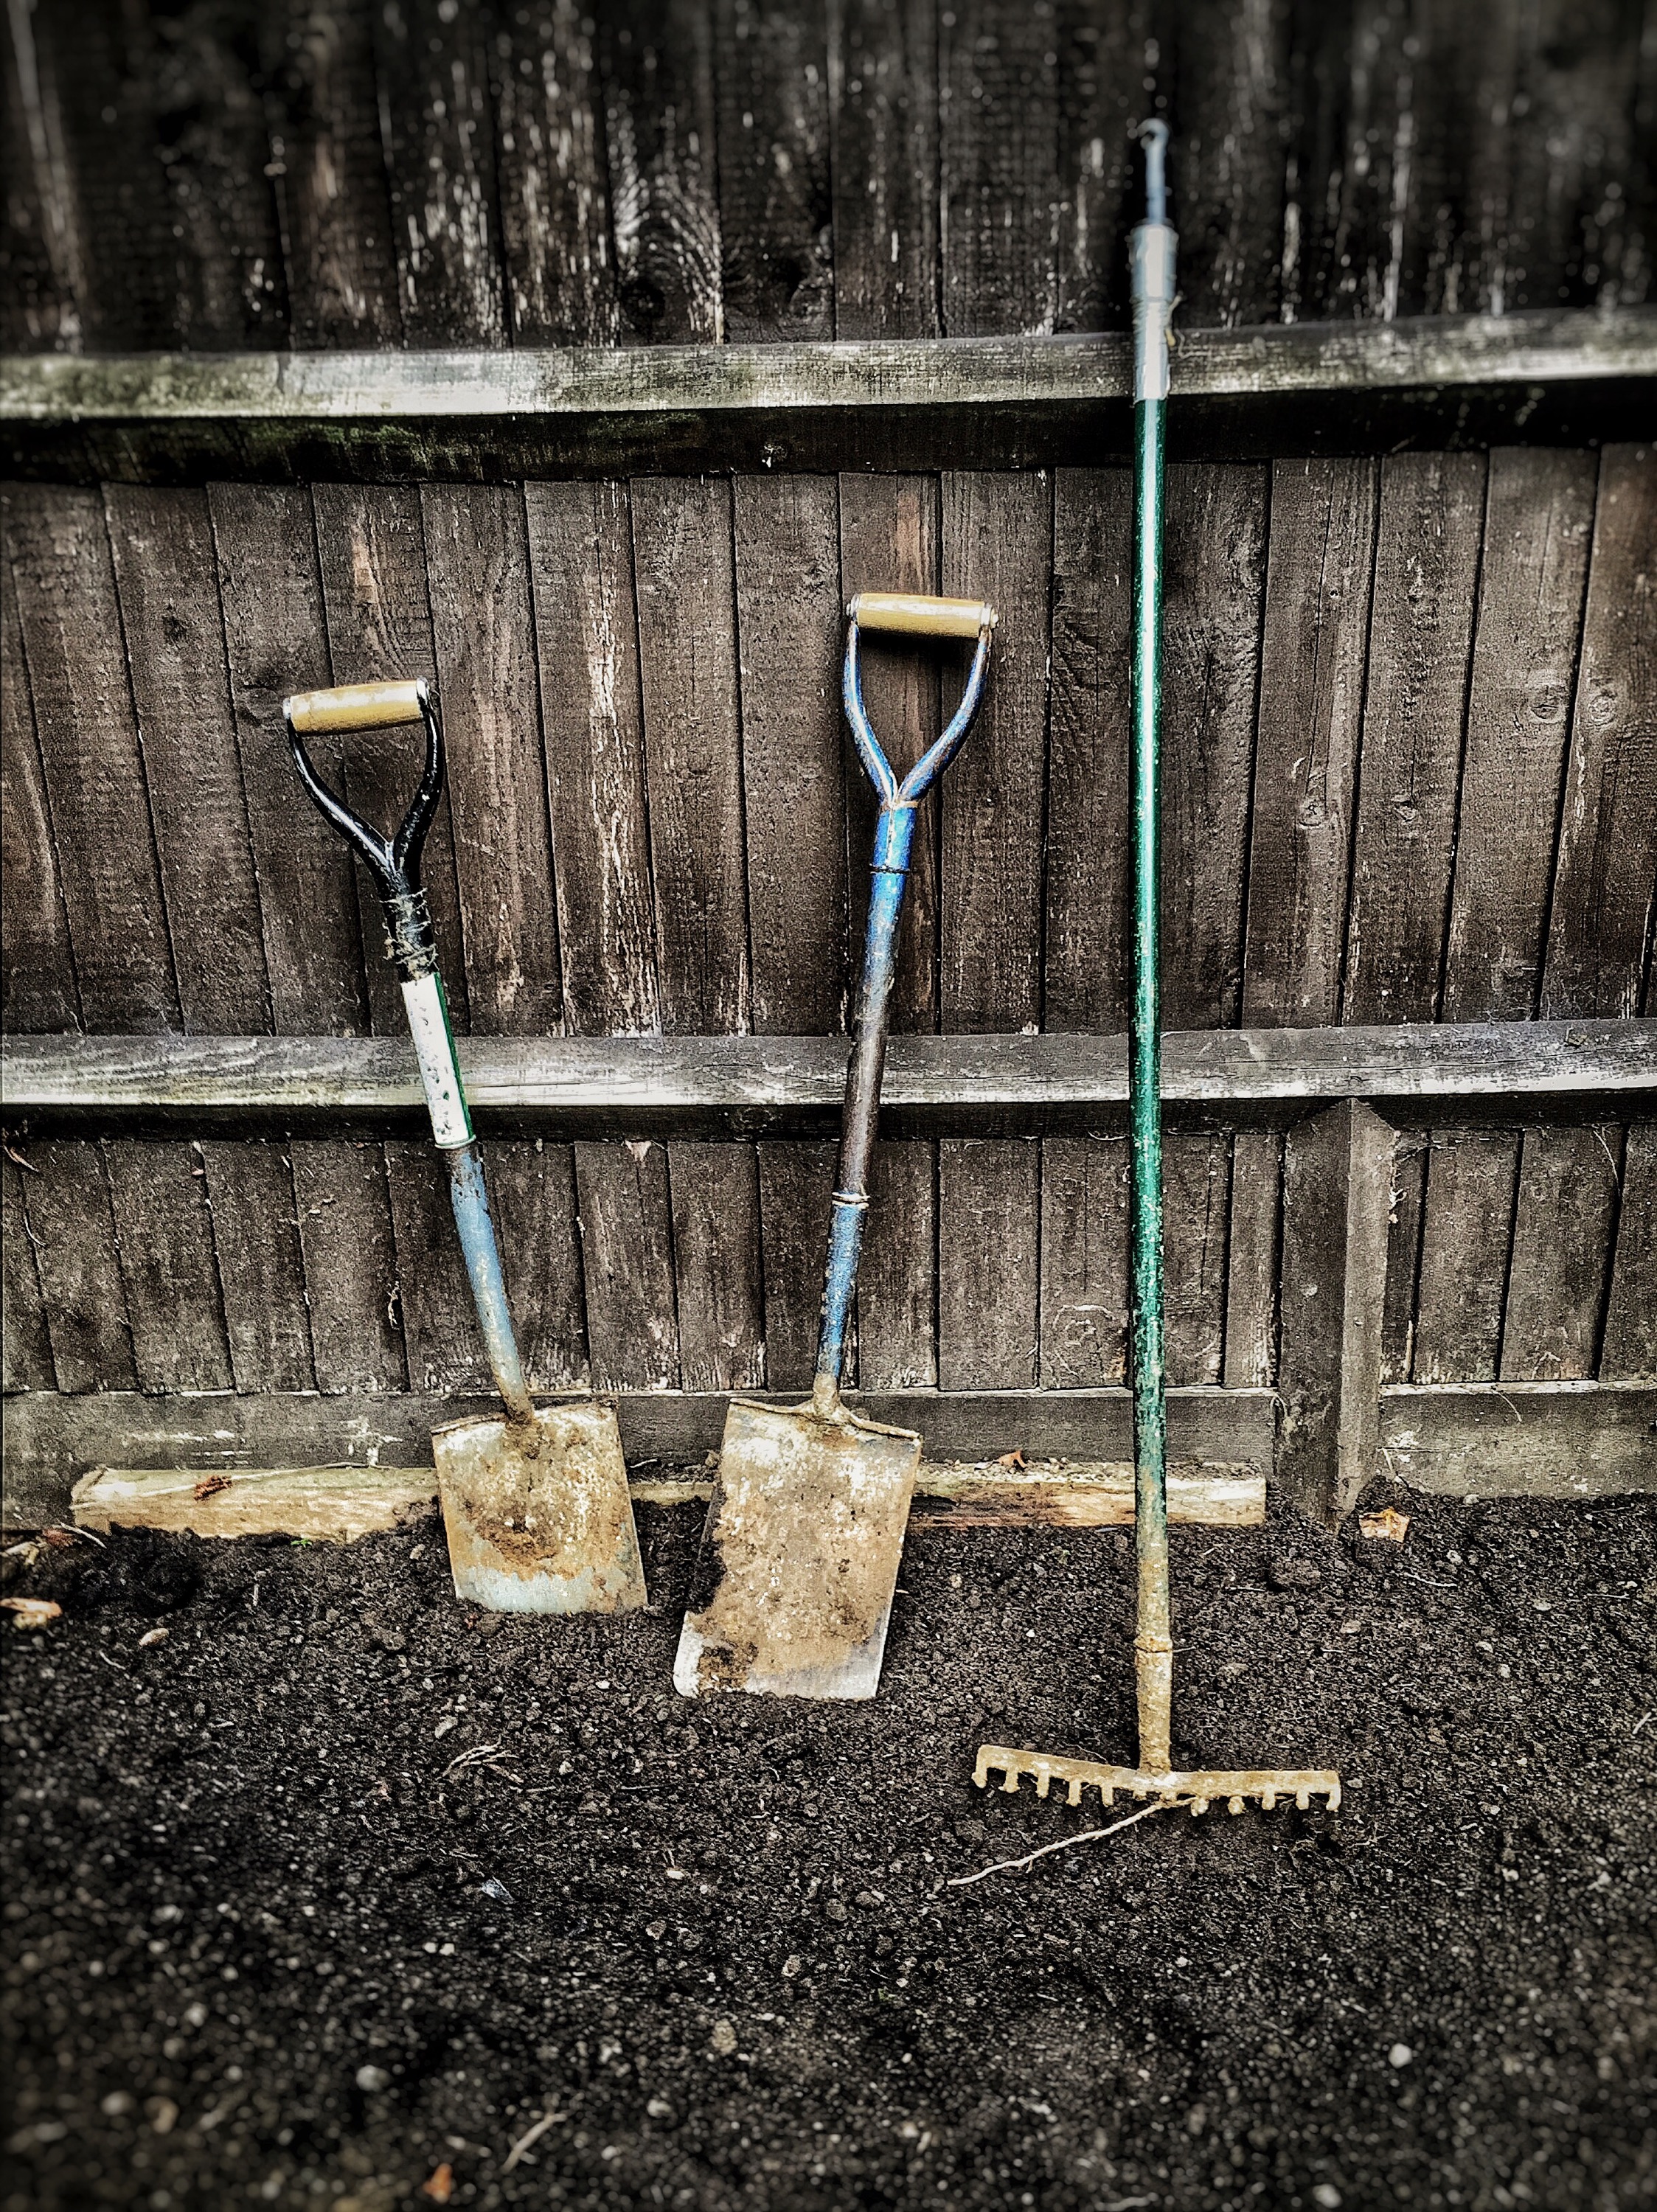 Day 3.2 – Tools of the trade